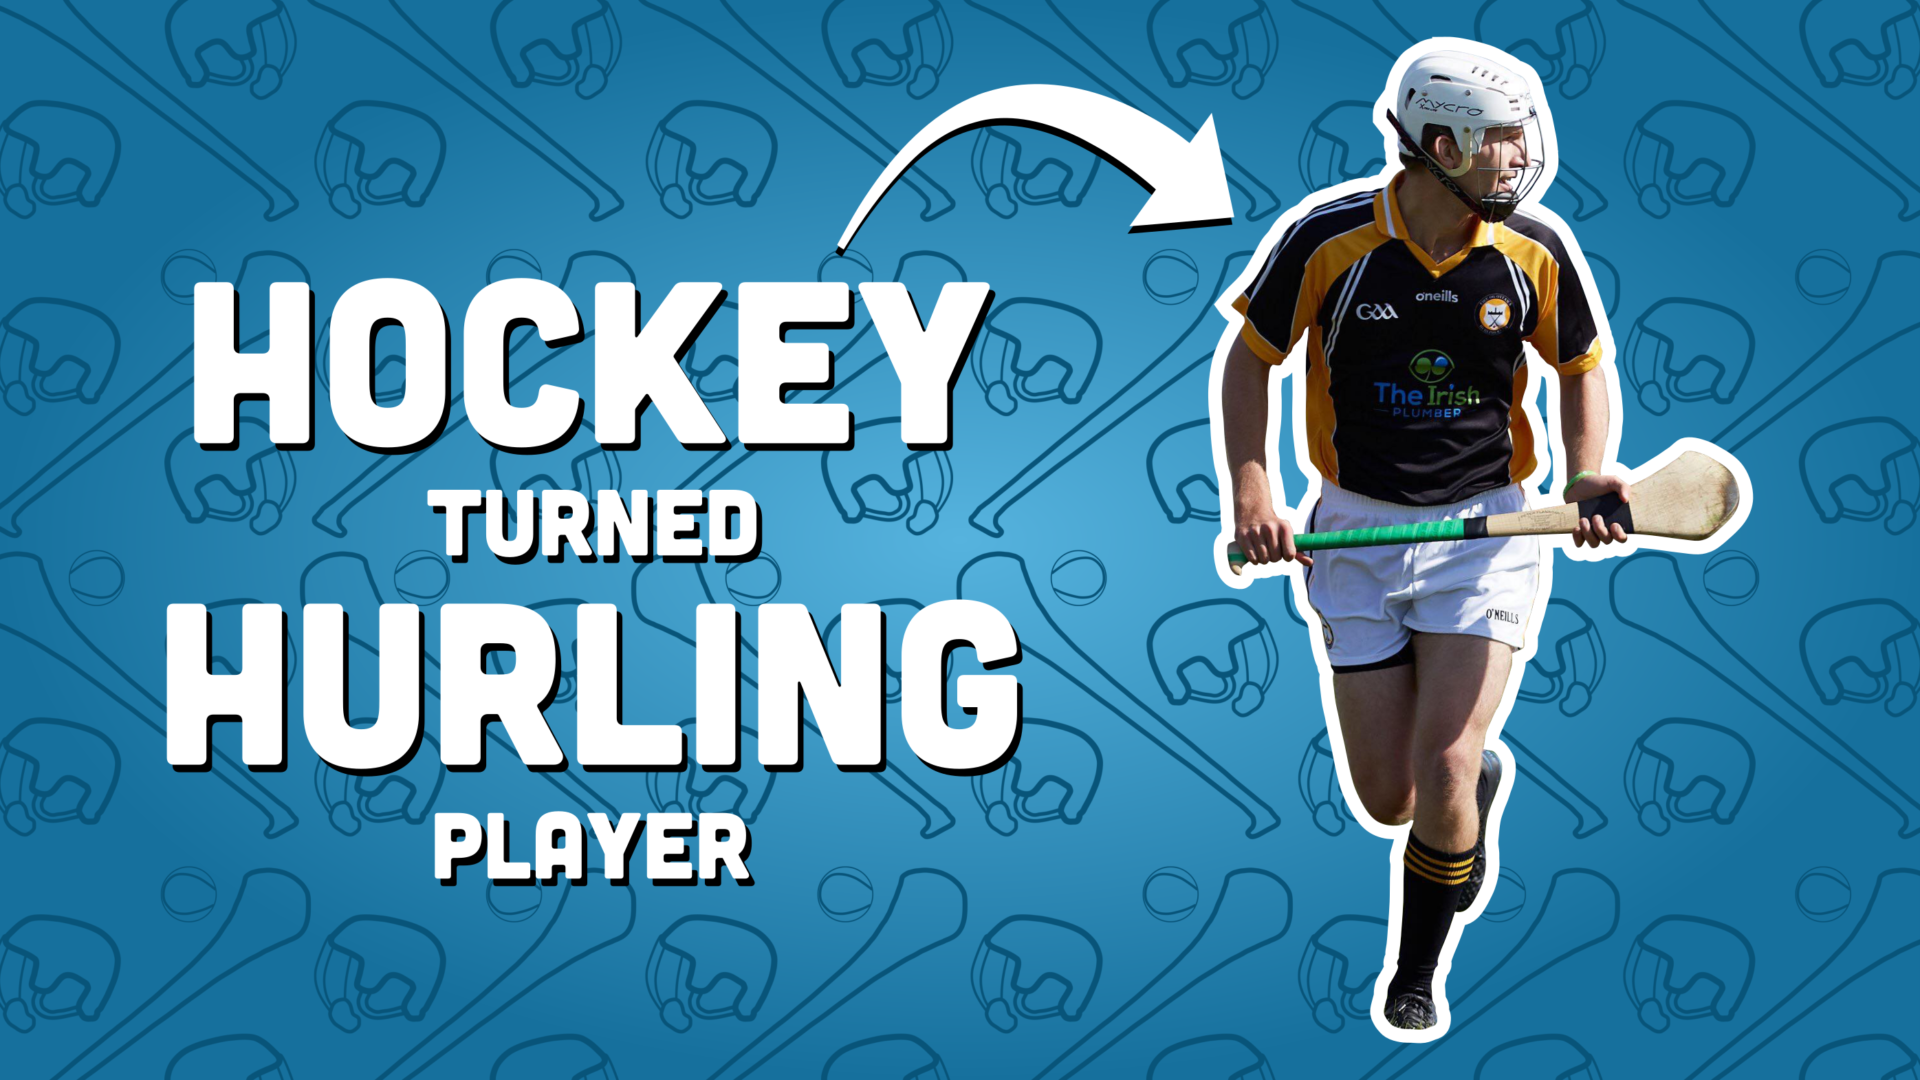 Canadian Hockey Player Now A Hurler in Ireland